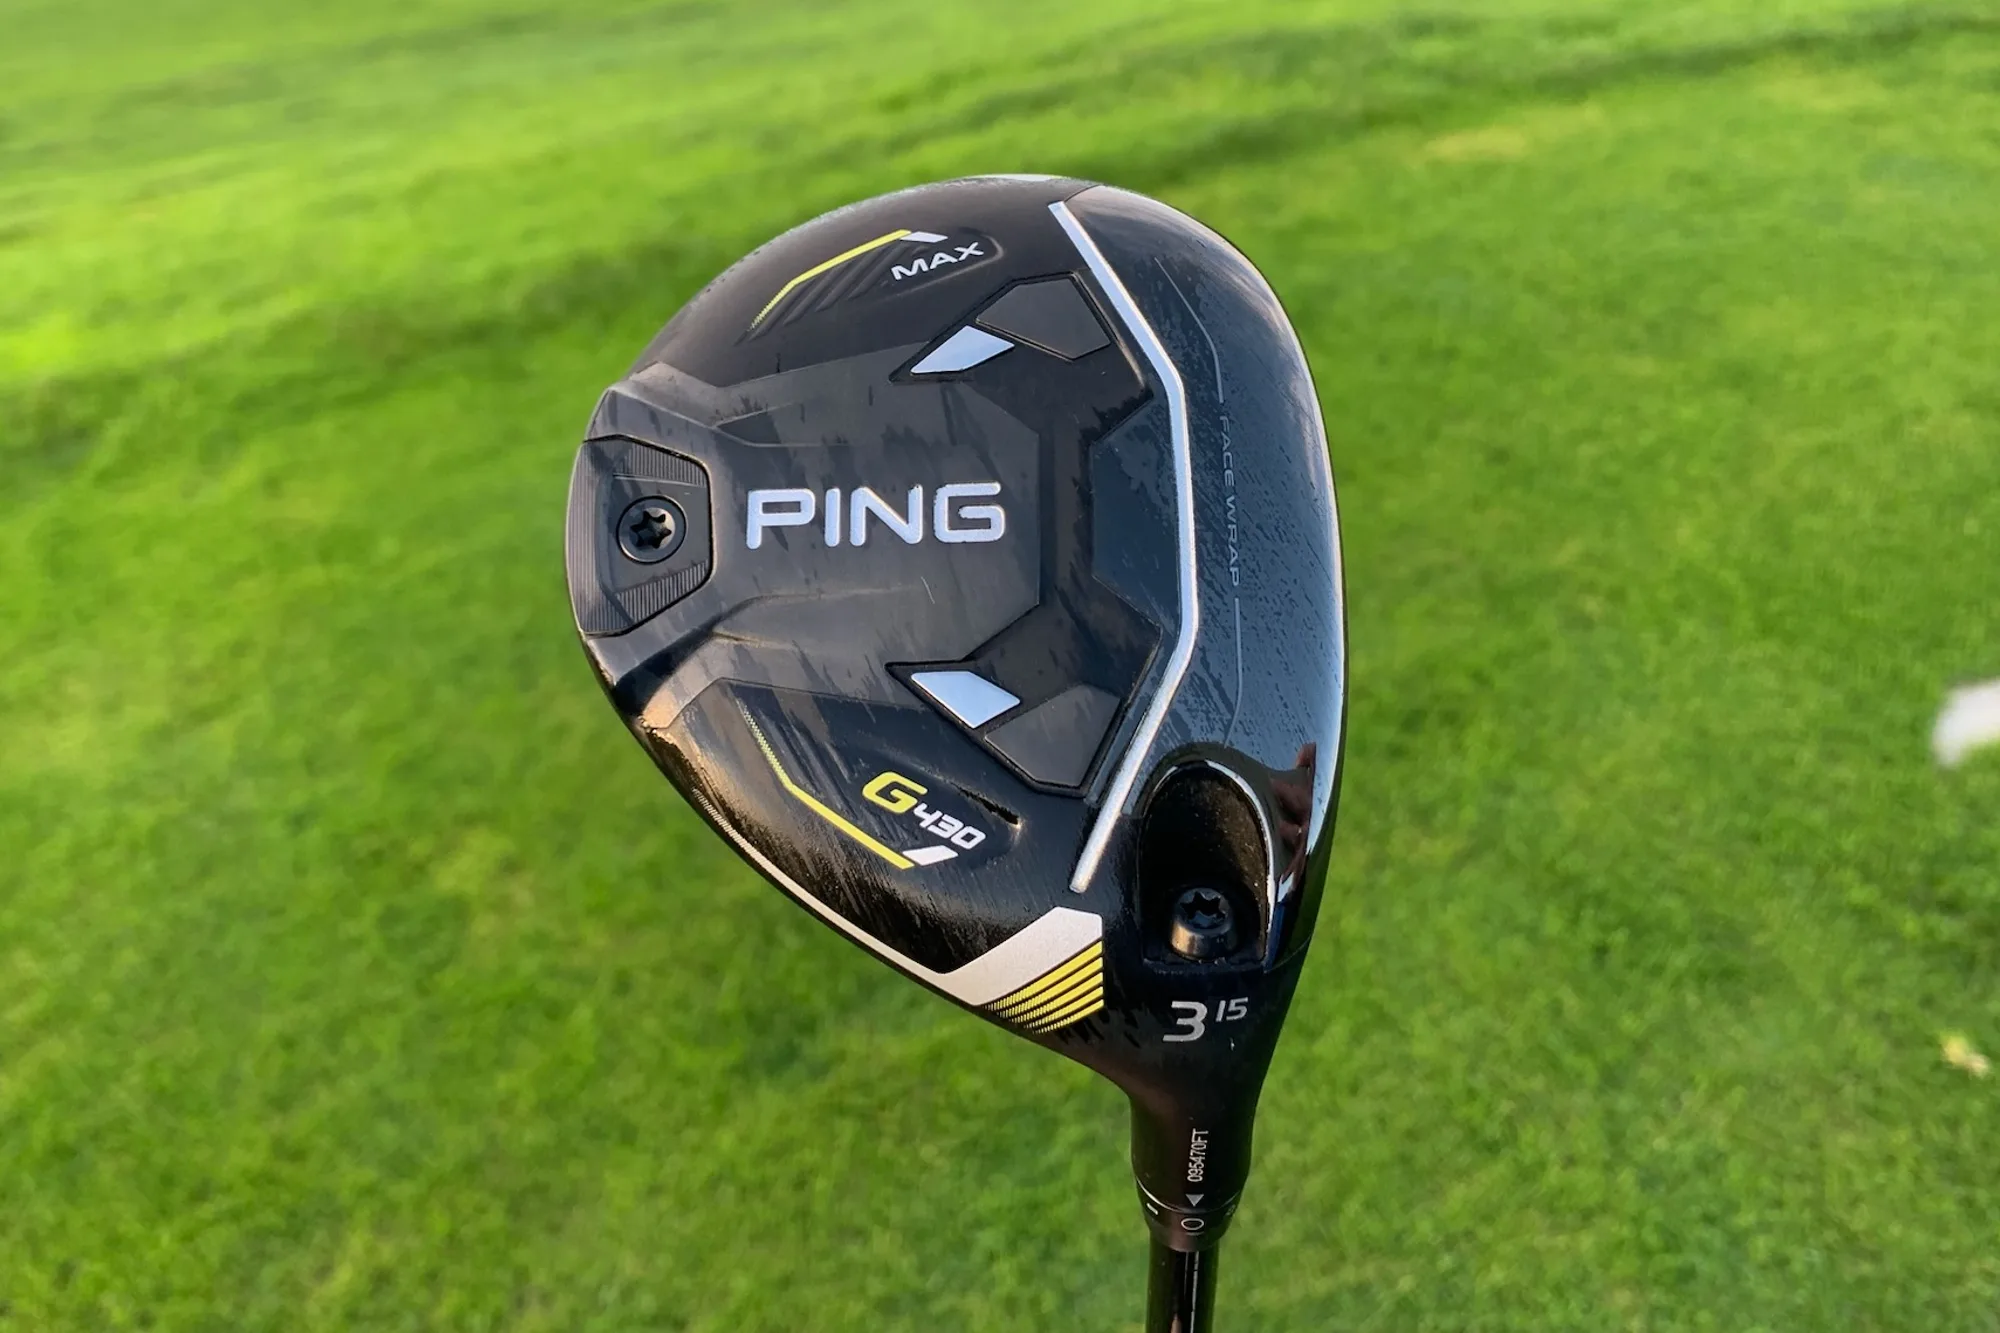 Ping G430 Max fairway woods review